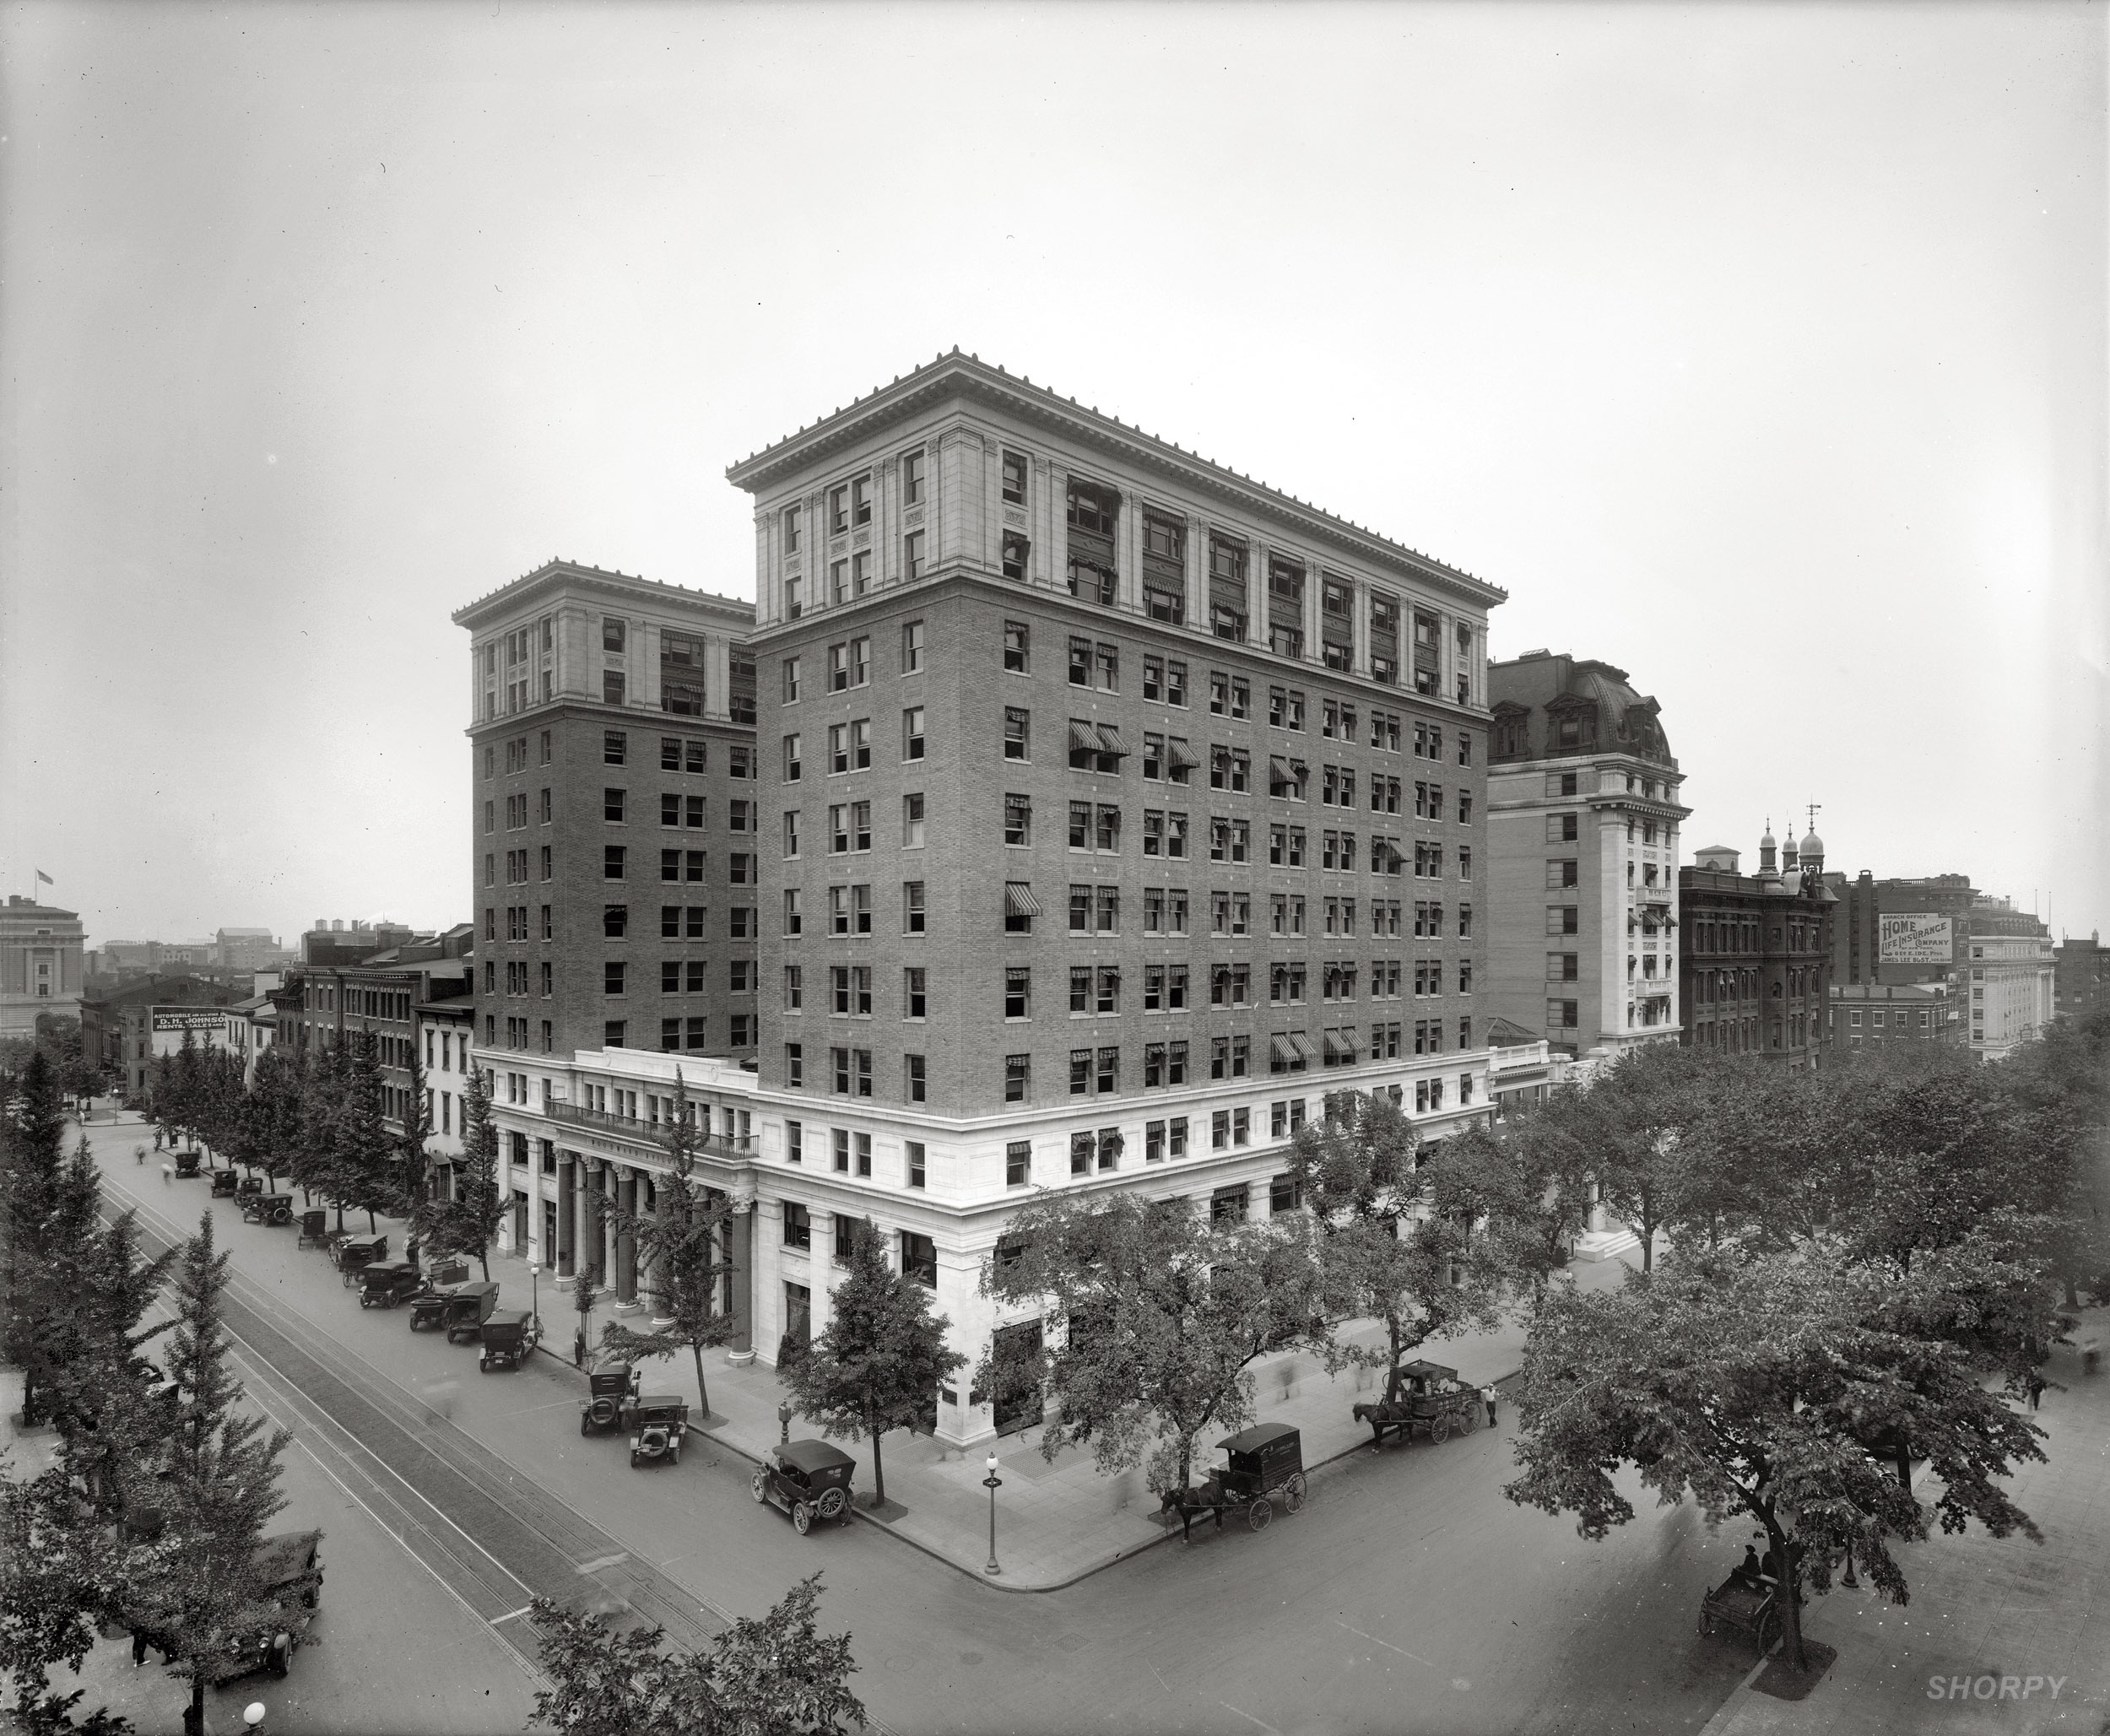 The Woodward Building in Washington circa 1923. The former office building, put up in 1911, became apartments in 2005. National Photo Co. View full size.